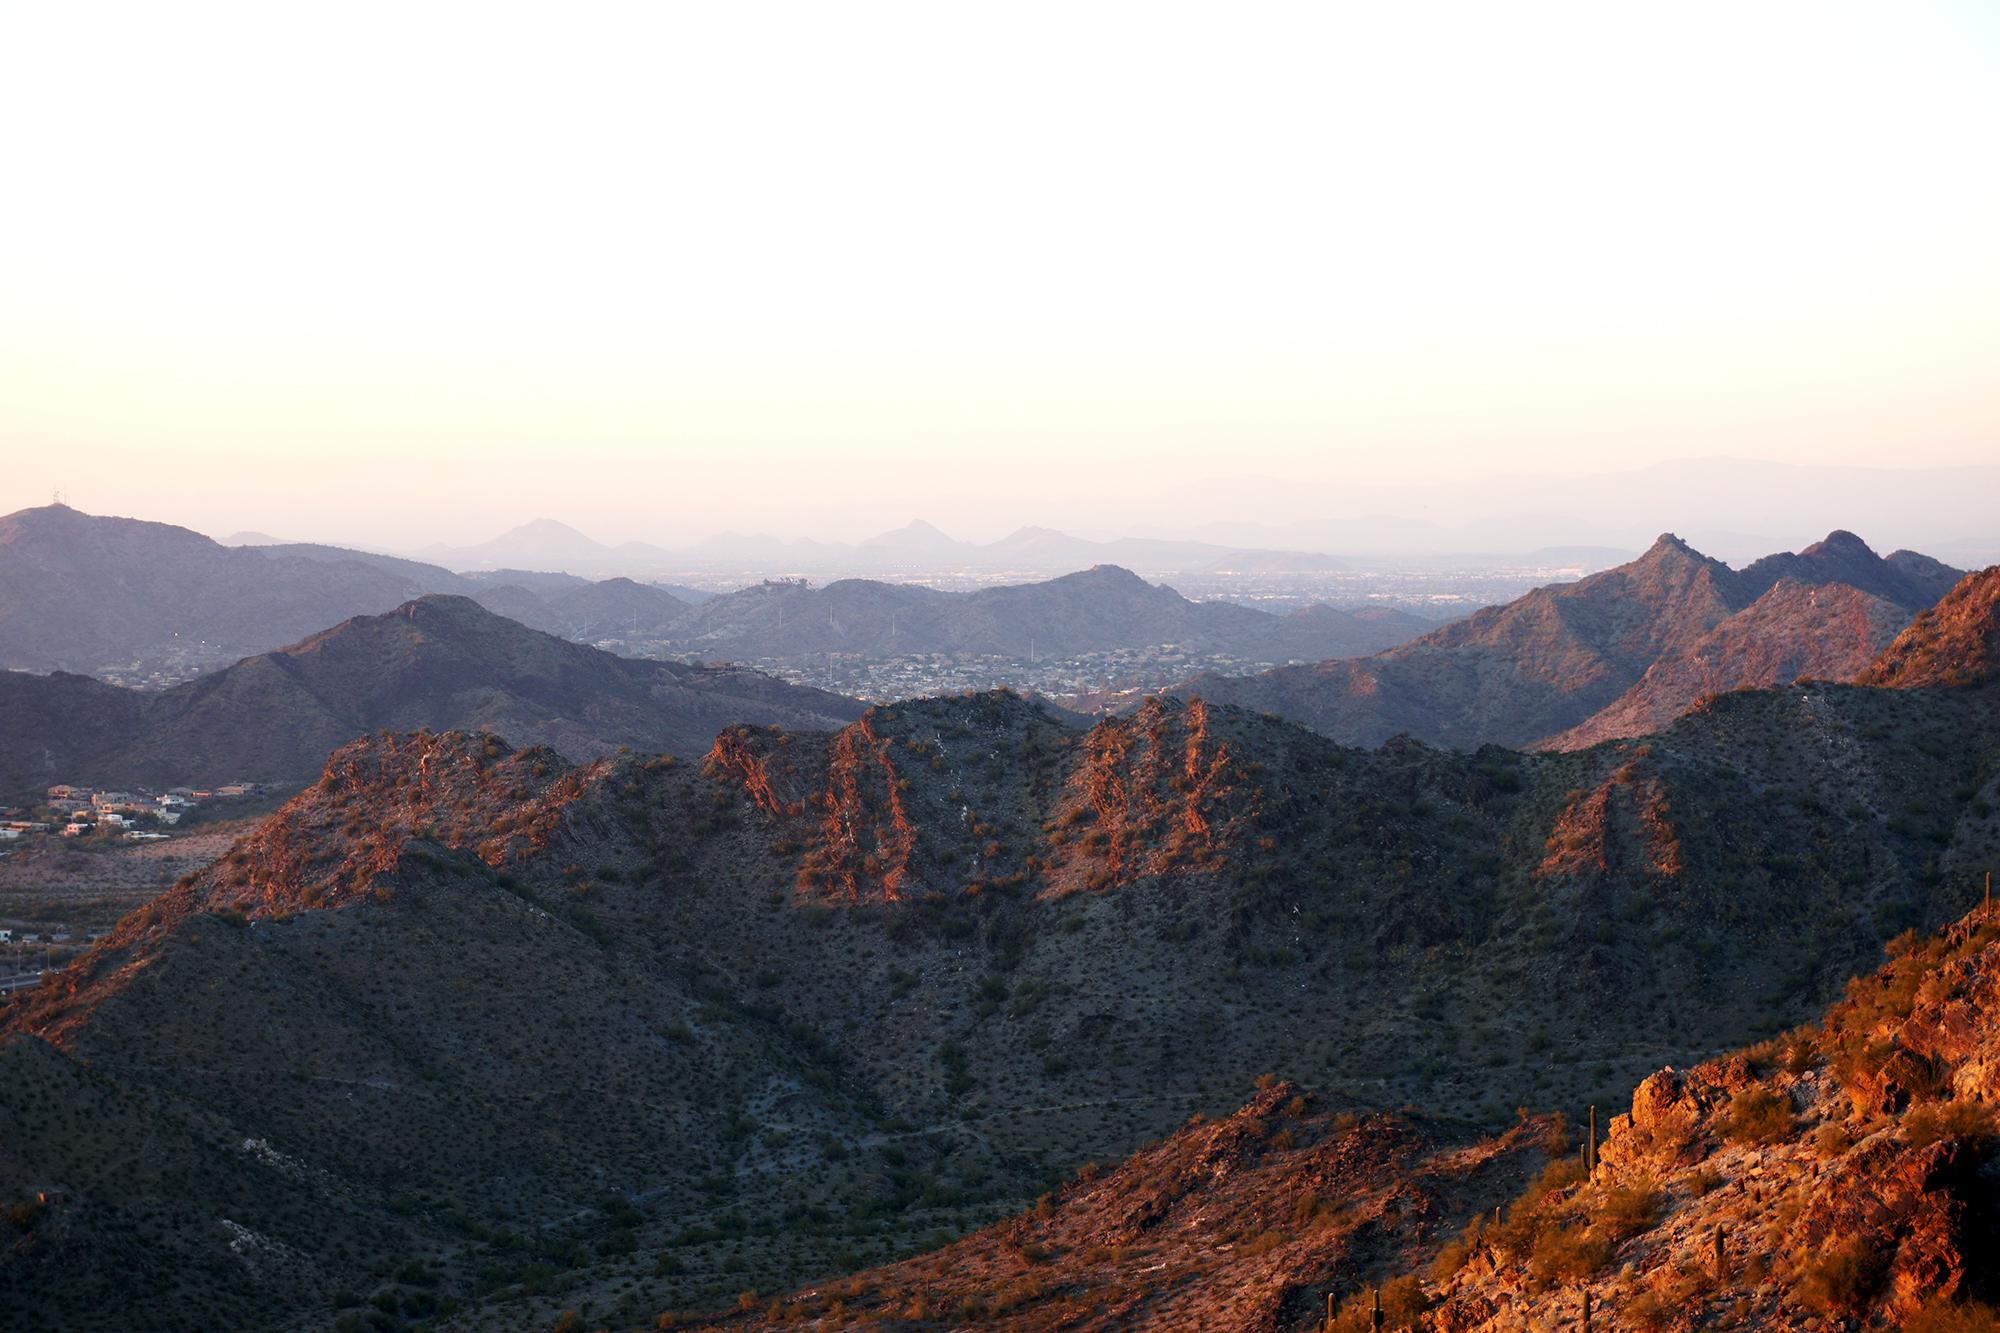 Cover image of this place Piestewa Peak